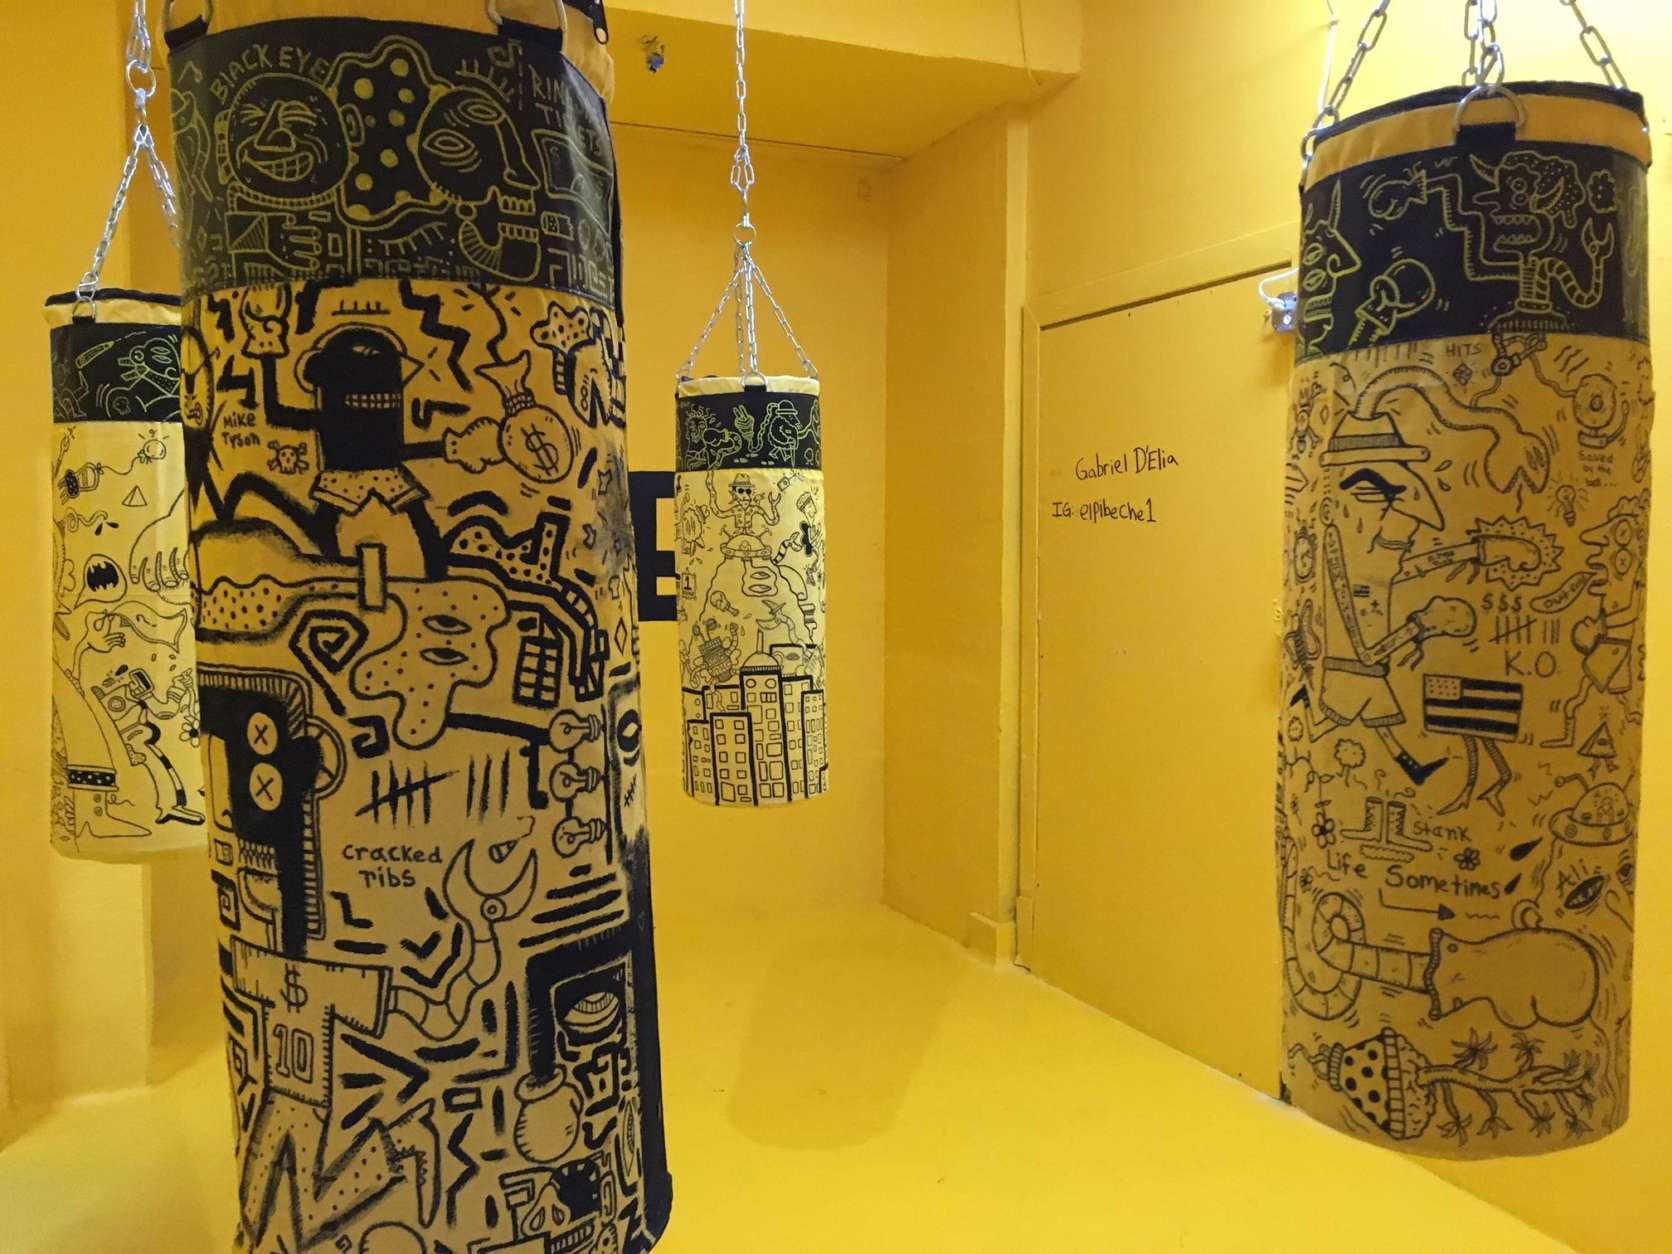 Punching bags designed by Gabriel D'Elia hang in the yellow boxing room. (WTOP/Noah Frank)